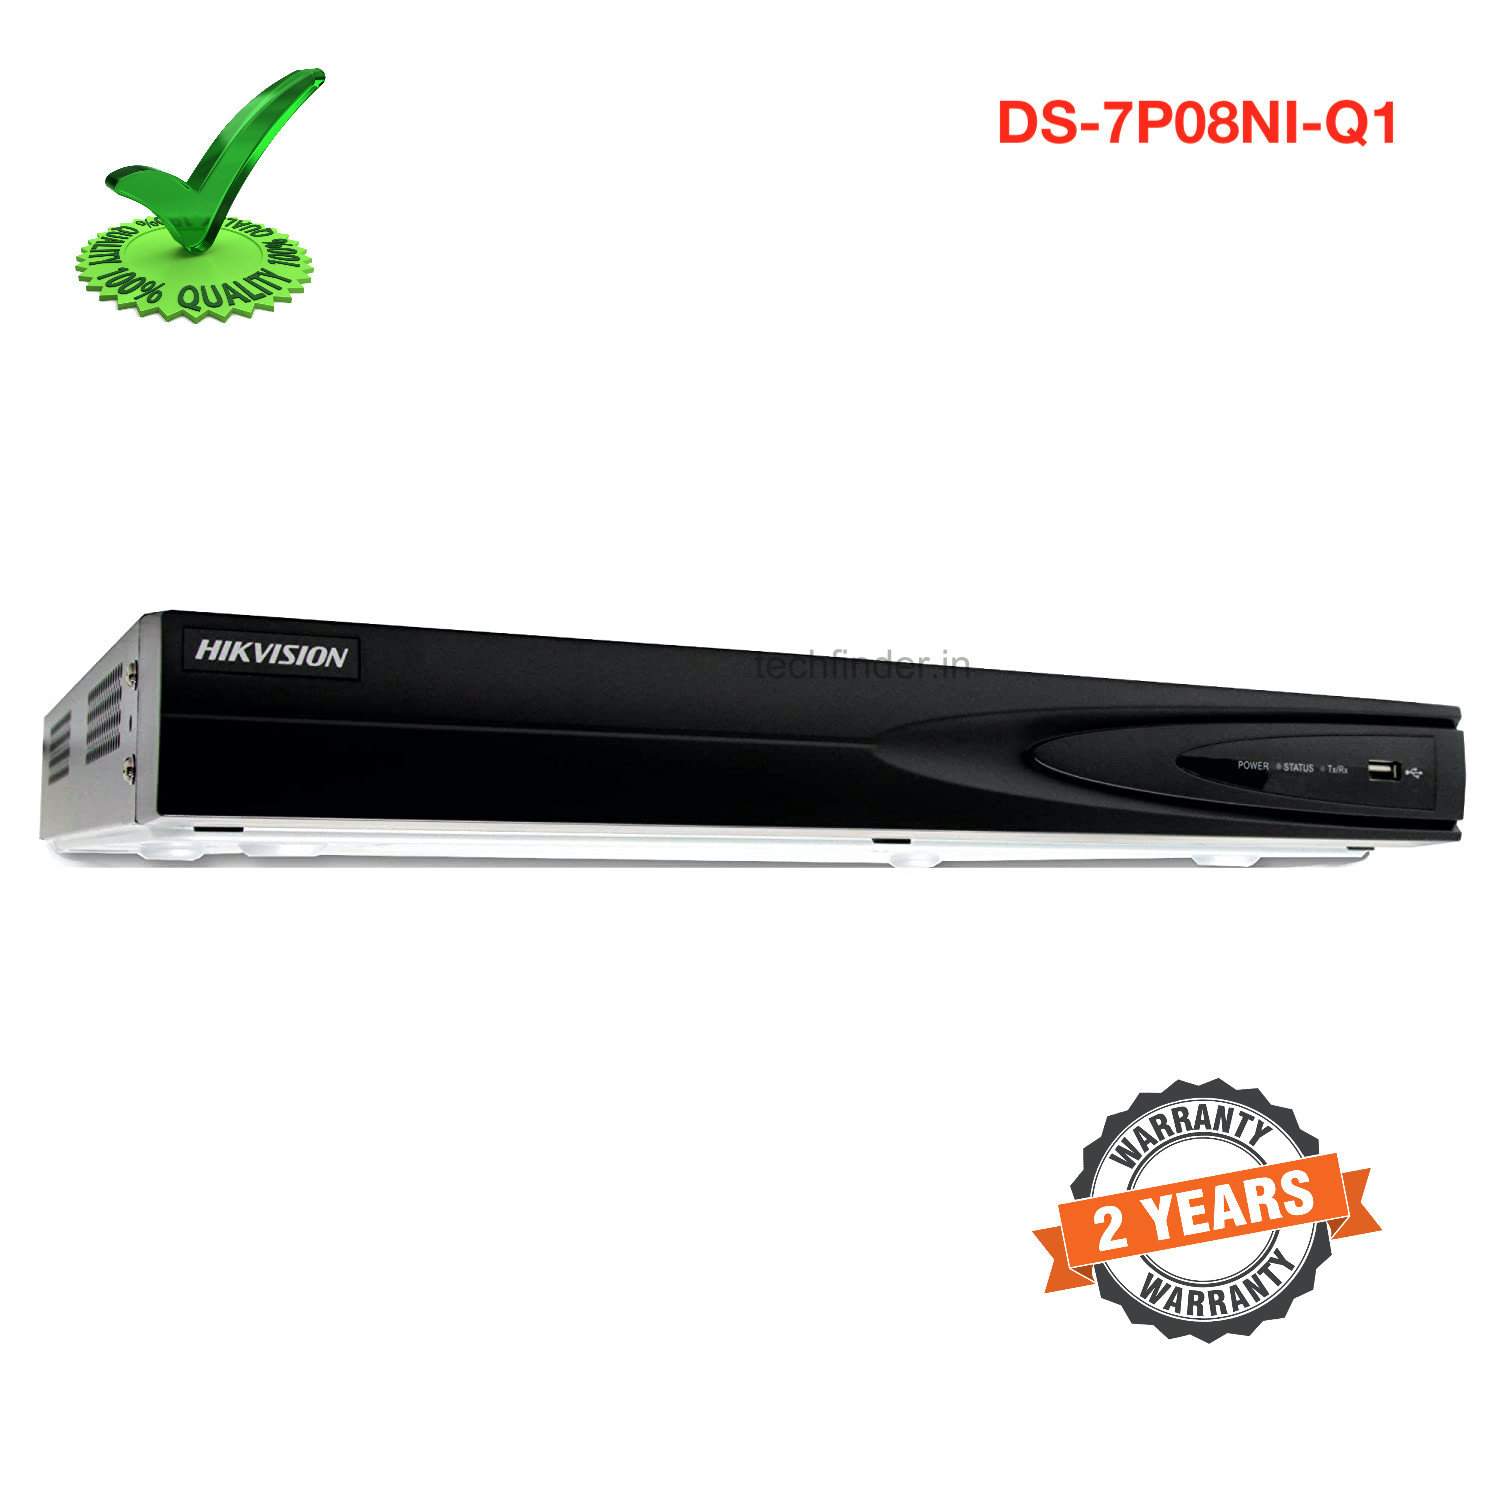 Hikvision DS-7P08NI-Q1 Hdmi 8ch Support 4k Nvr